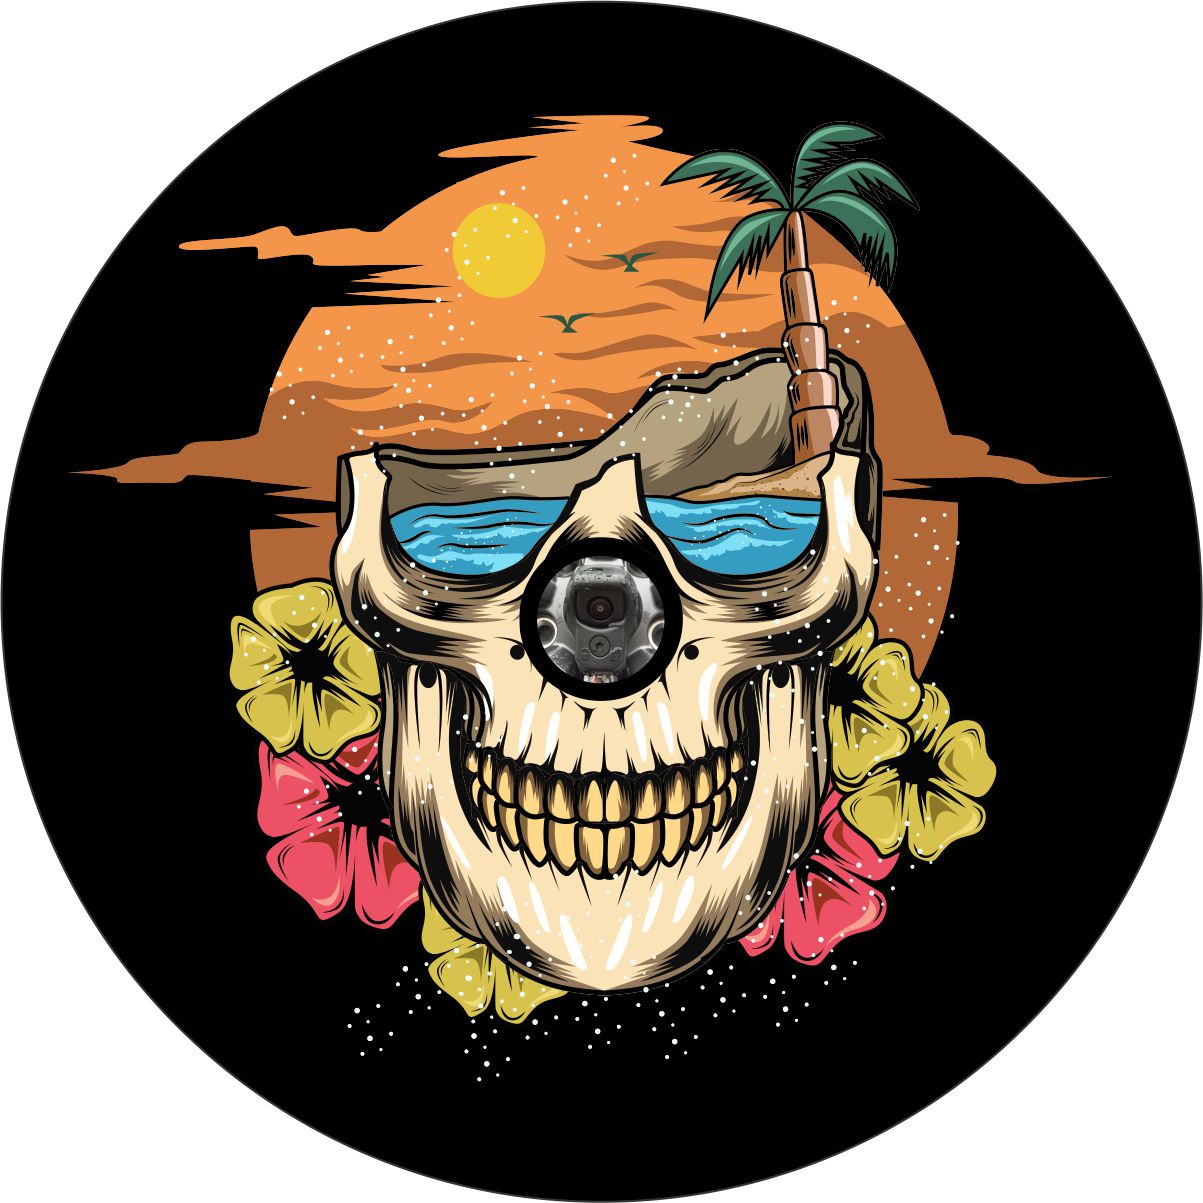 Smiling skull spare tire cover design layered into a beach scene with the ocean, palm trees, and tropical hibiscus flowers for black vinyl covers with a back up camera hole